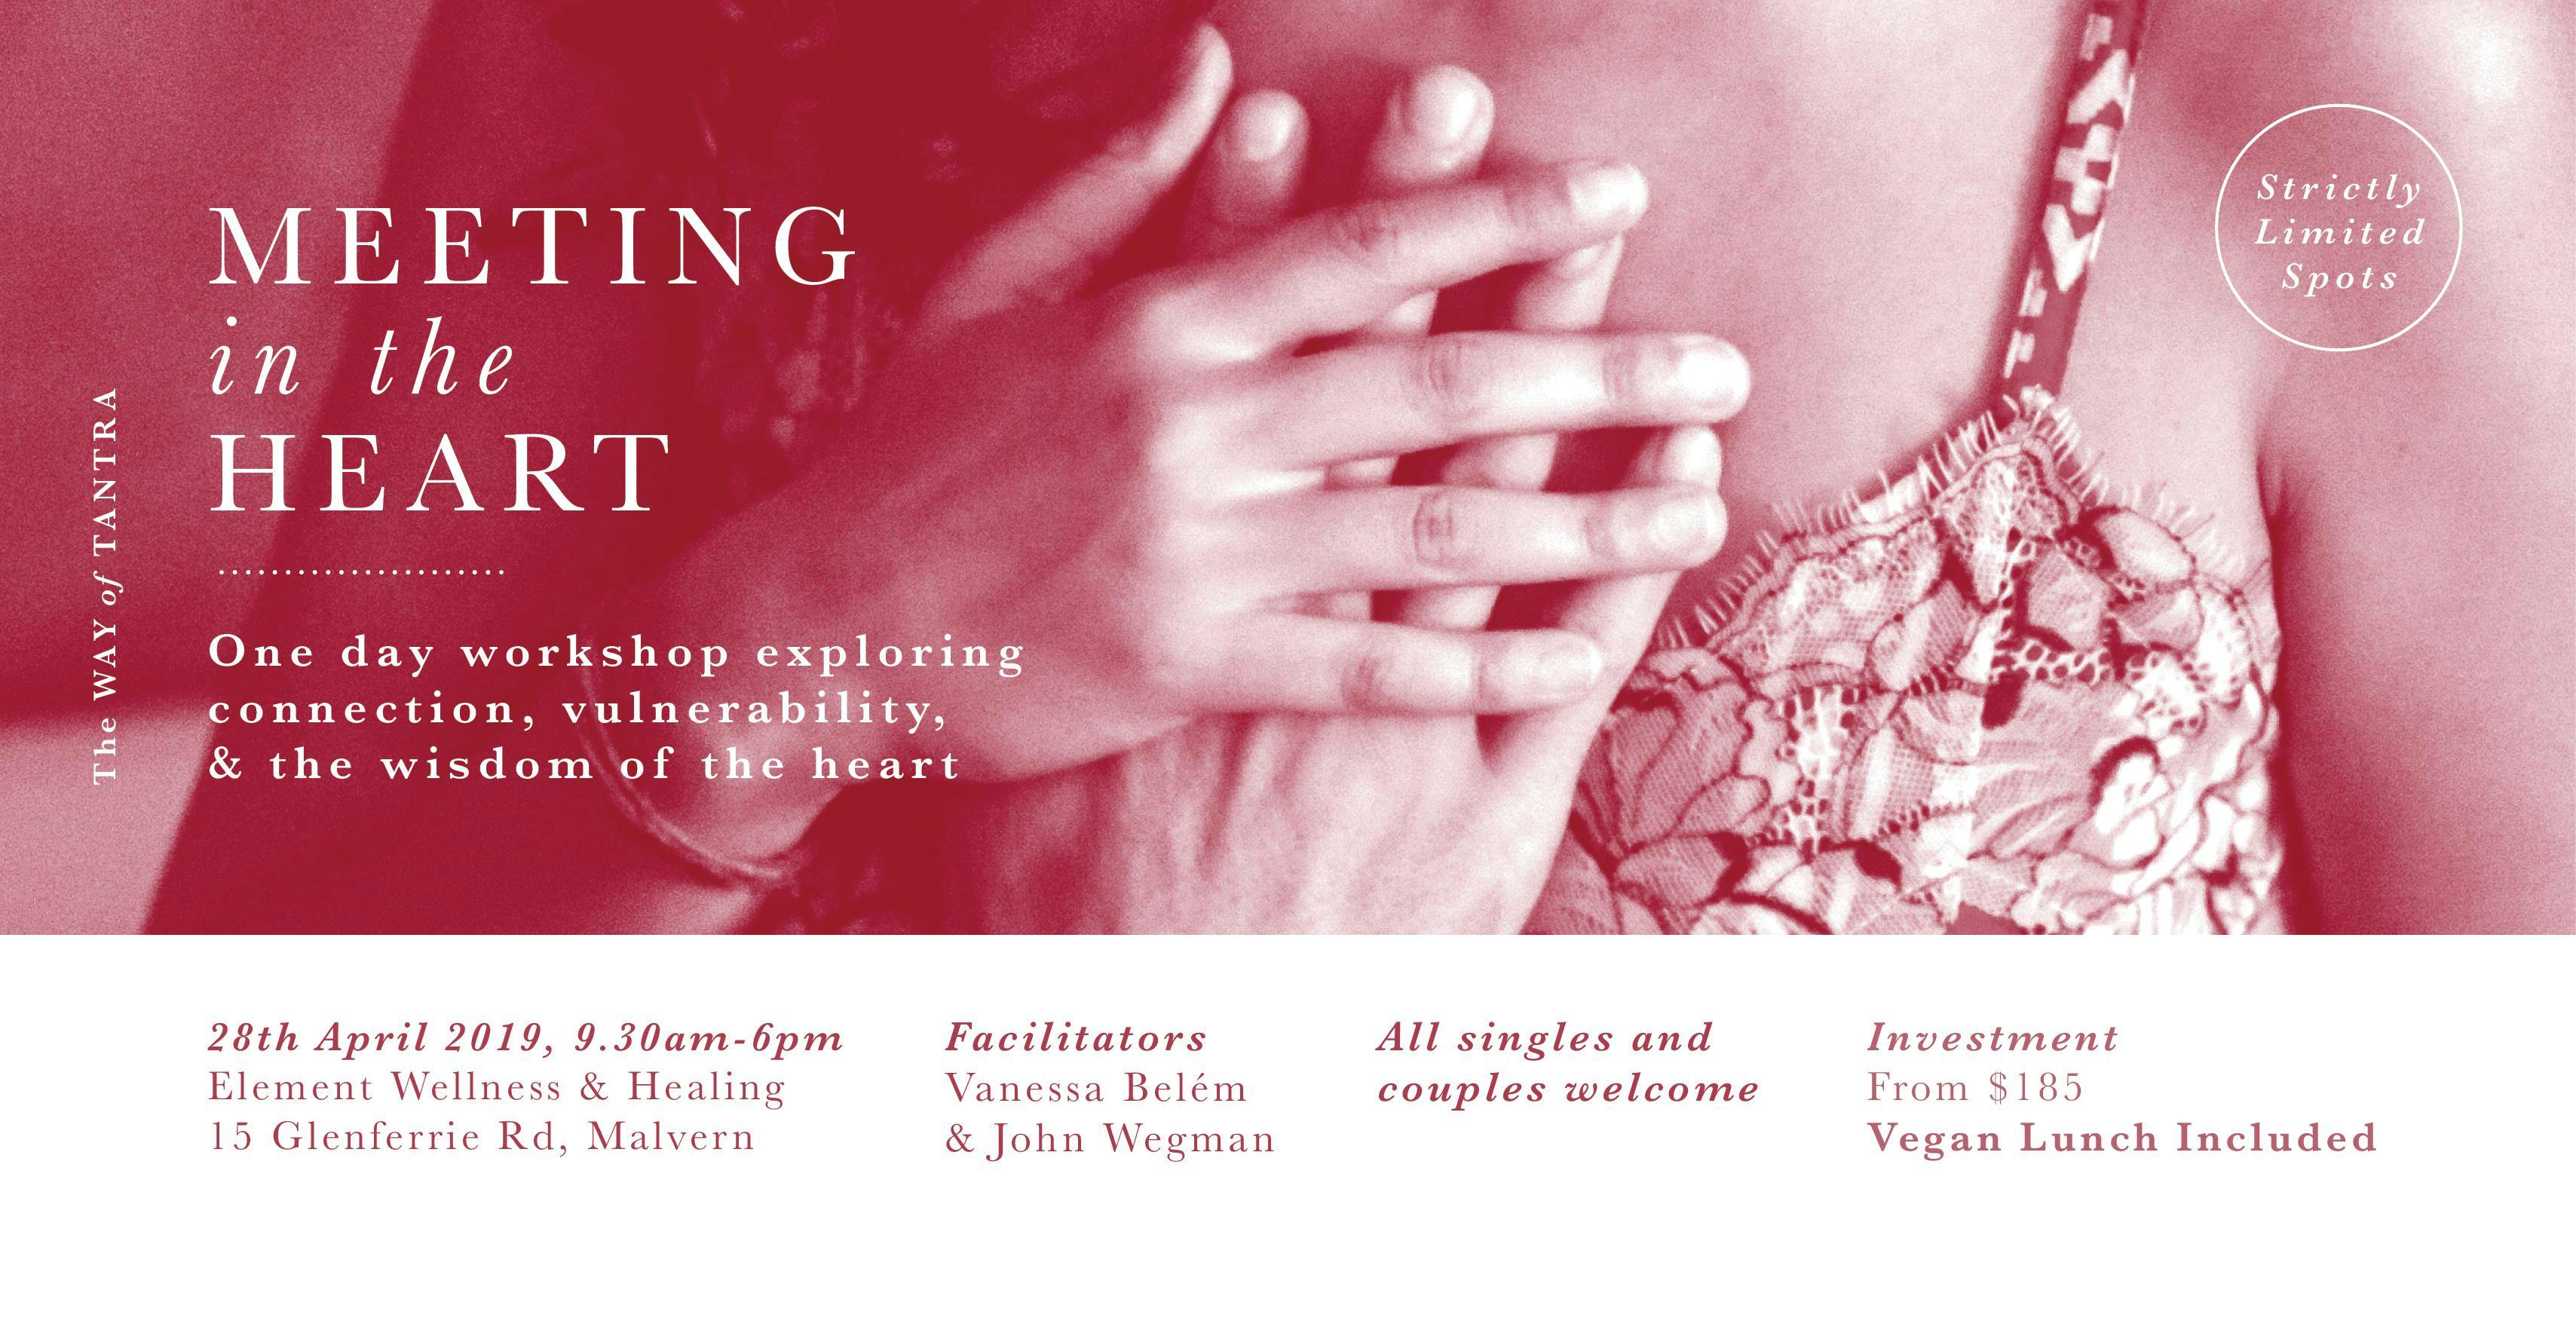 Meeting in the Heart - Full Day Tantra Workshop